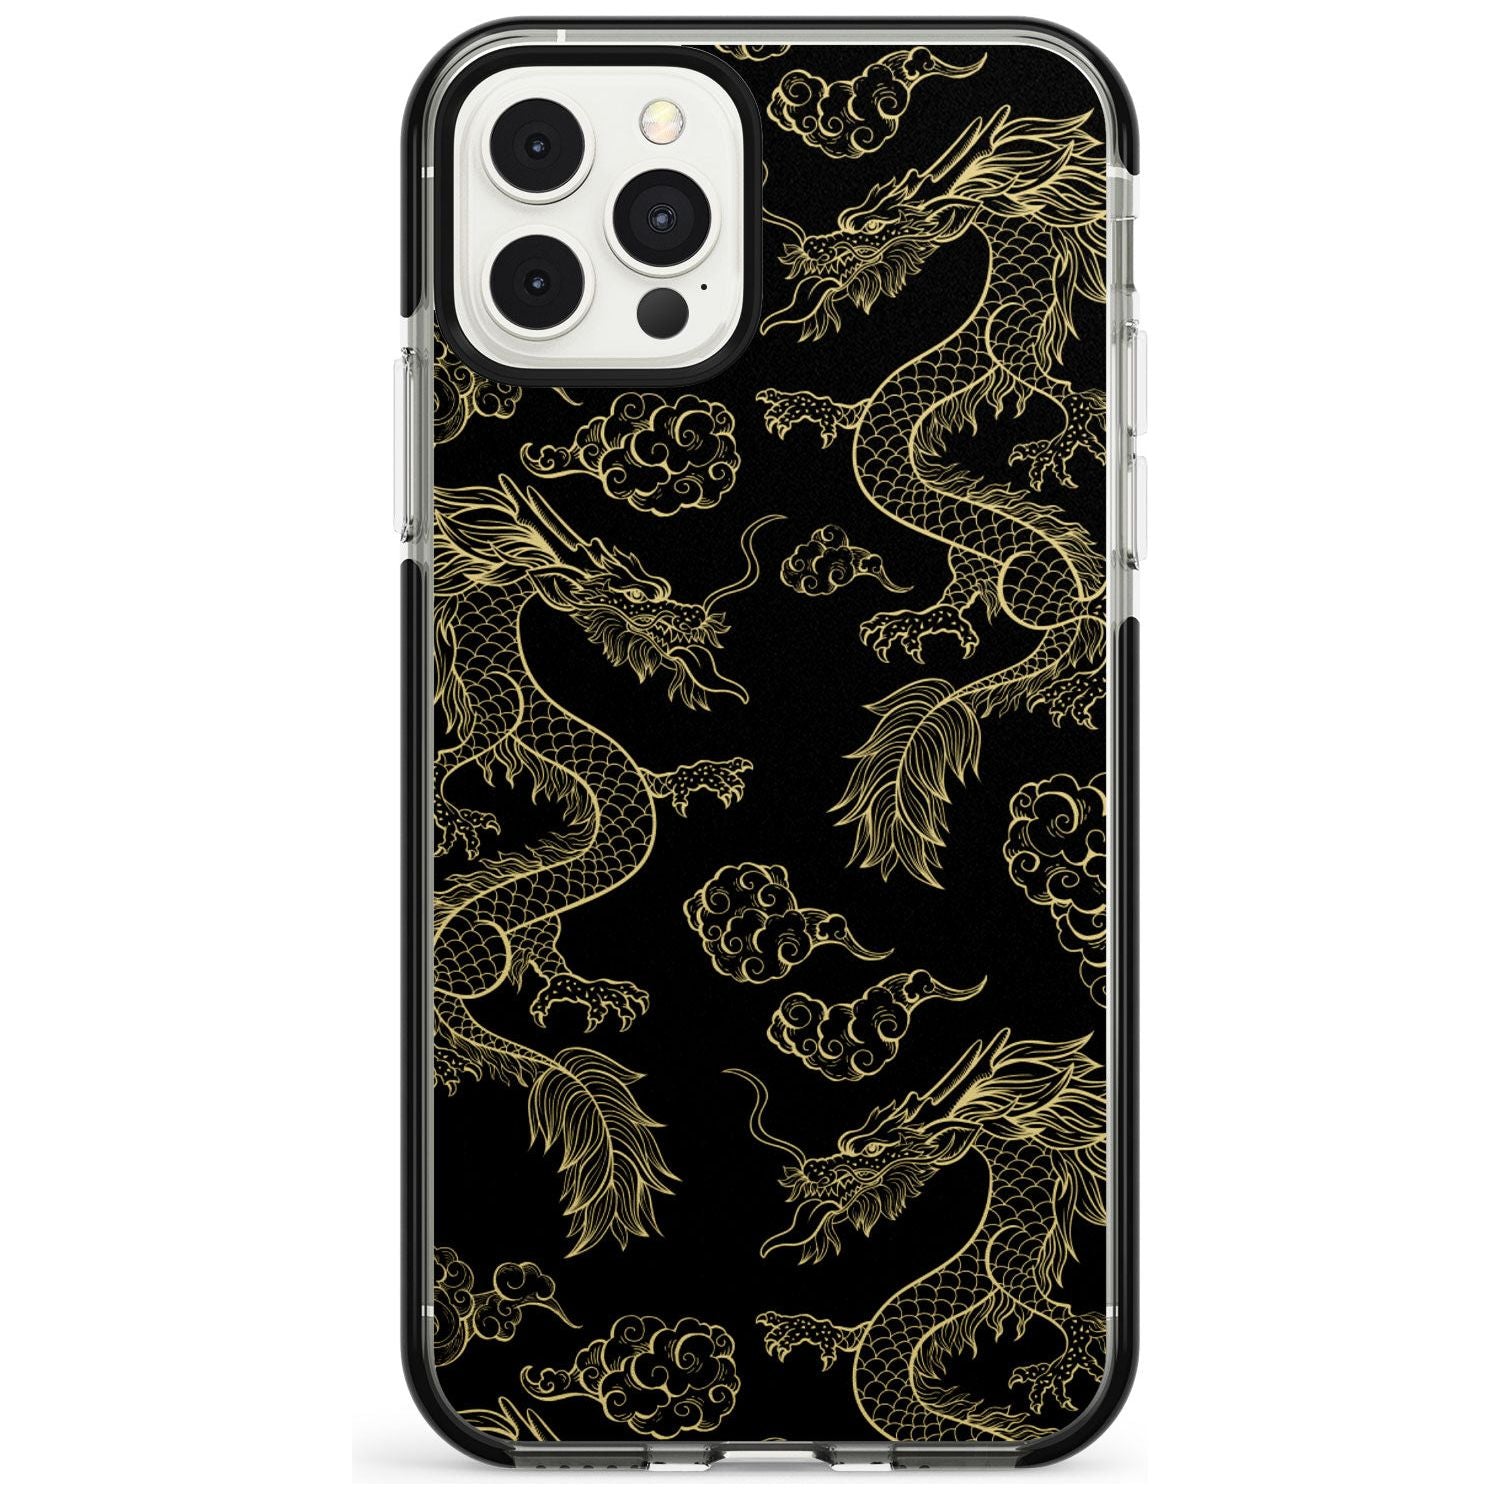 Black and Gold Dragon Pattern Black Impact Phone Case for iPhone 11